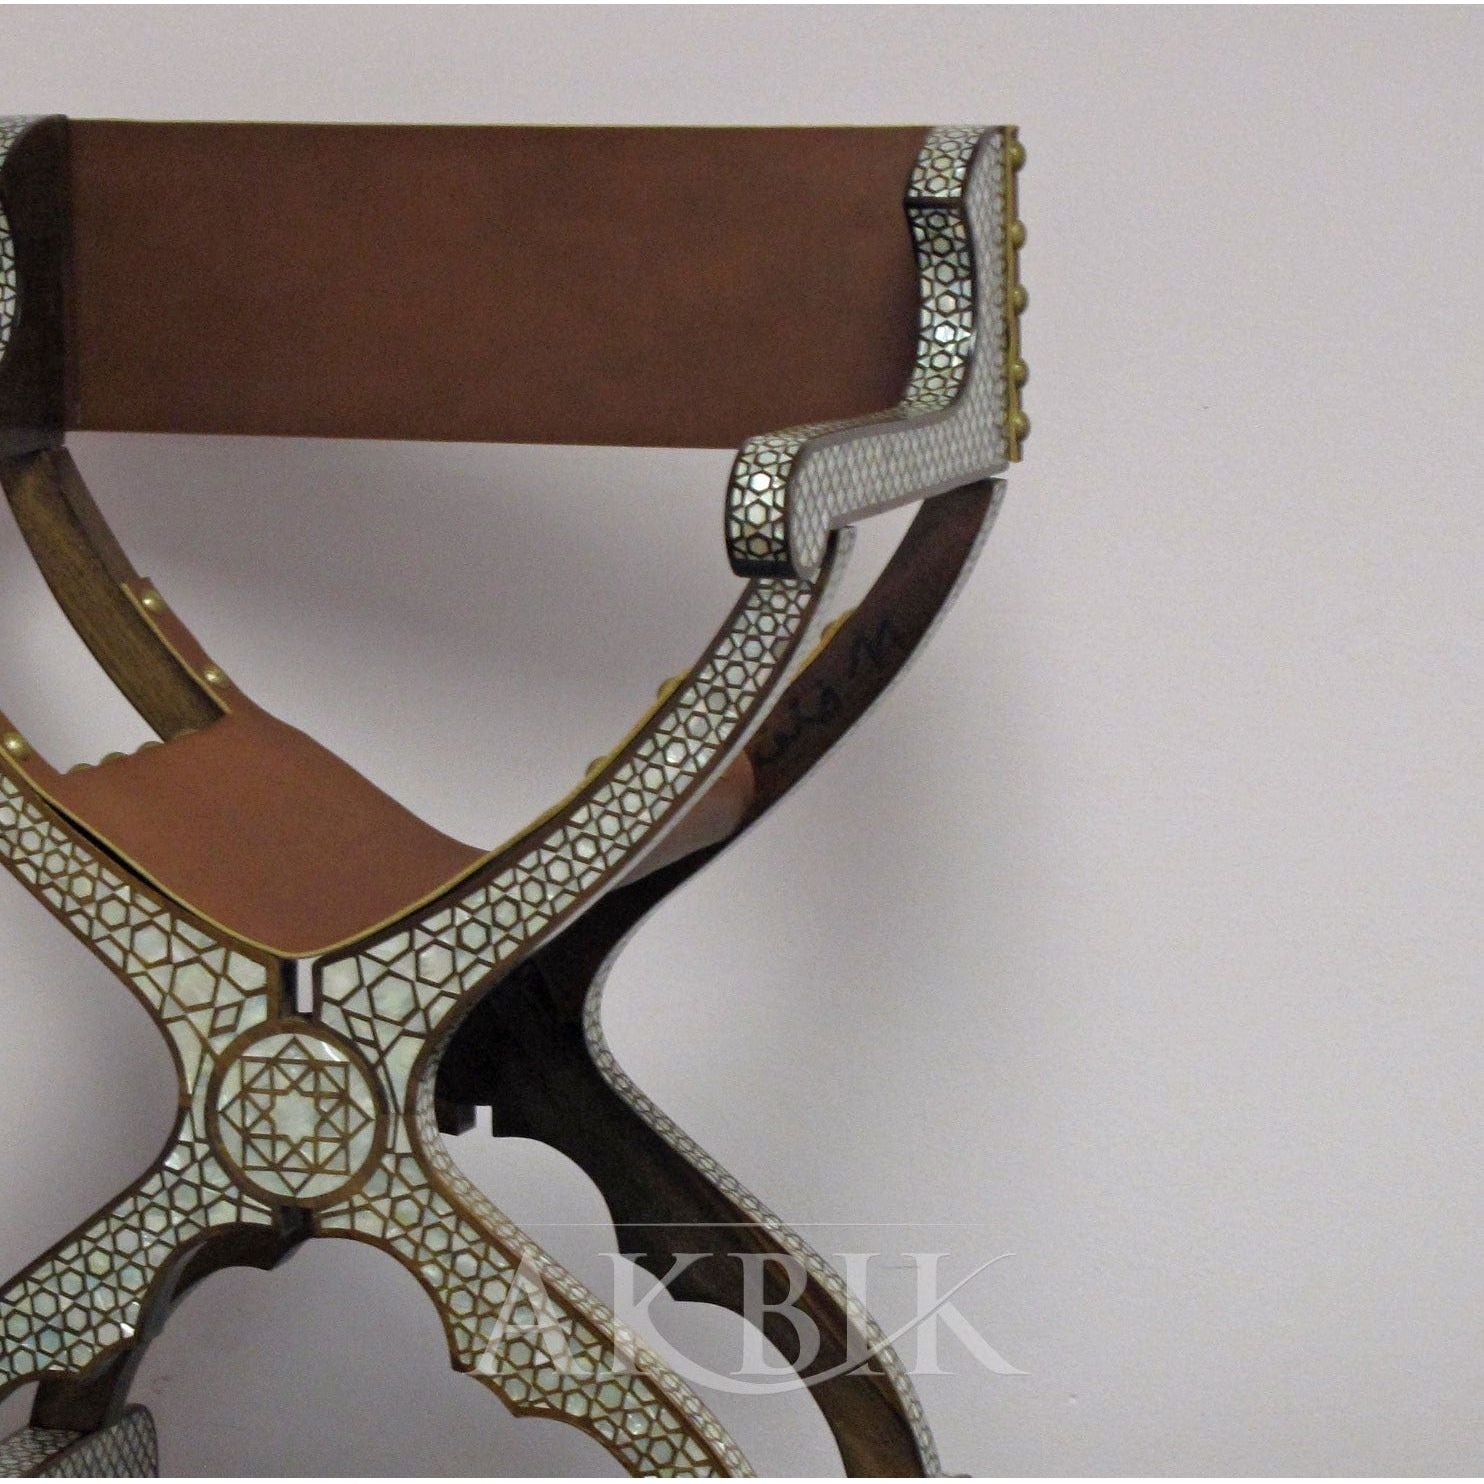 MEDITERRANEAN CHAIR INLAID WITH MOTHER OF PEARL - AKBIK Furniture & Design